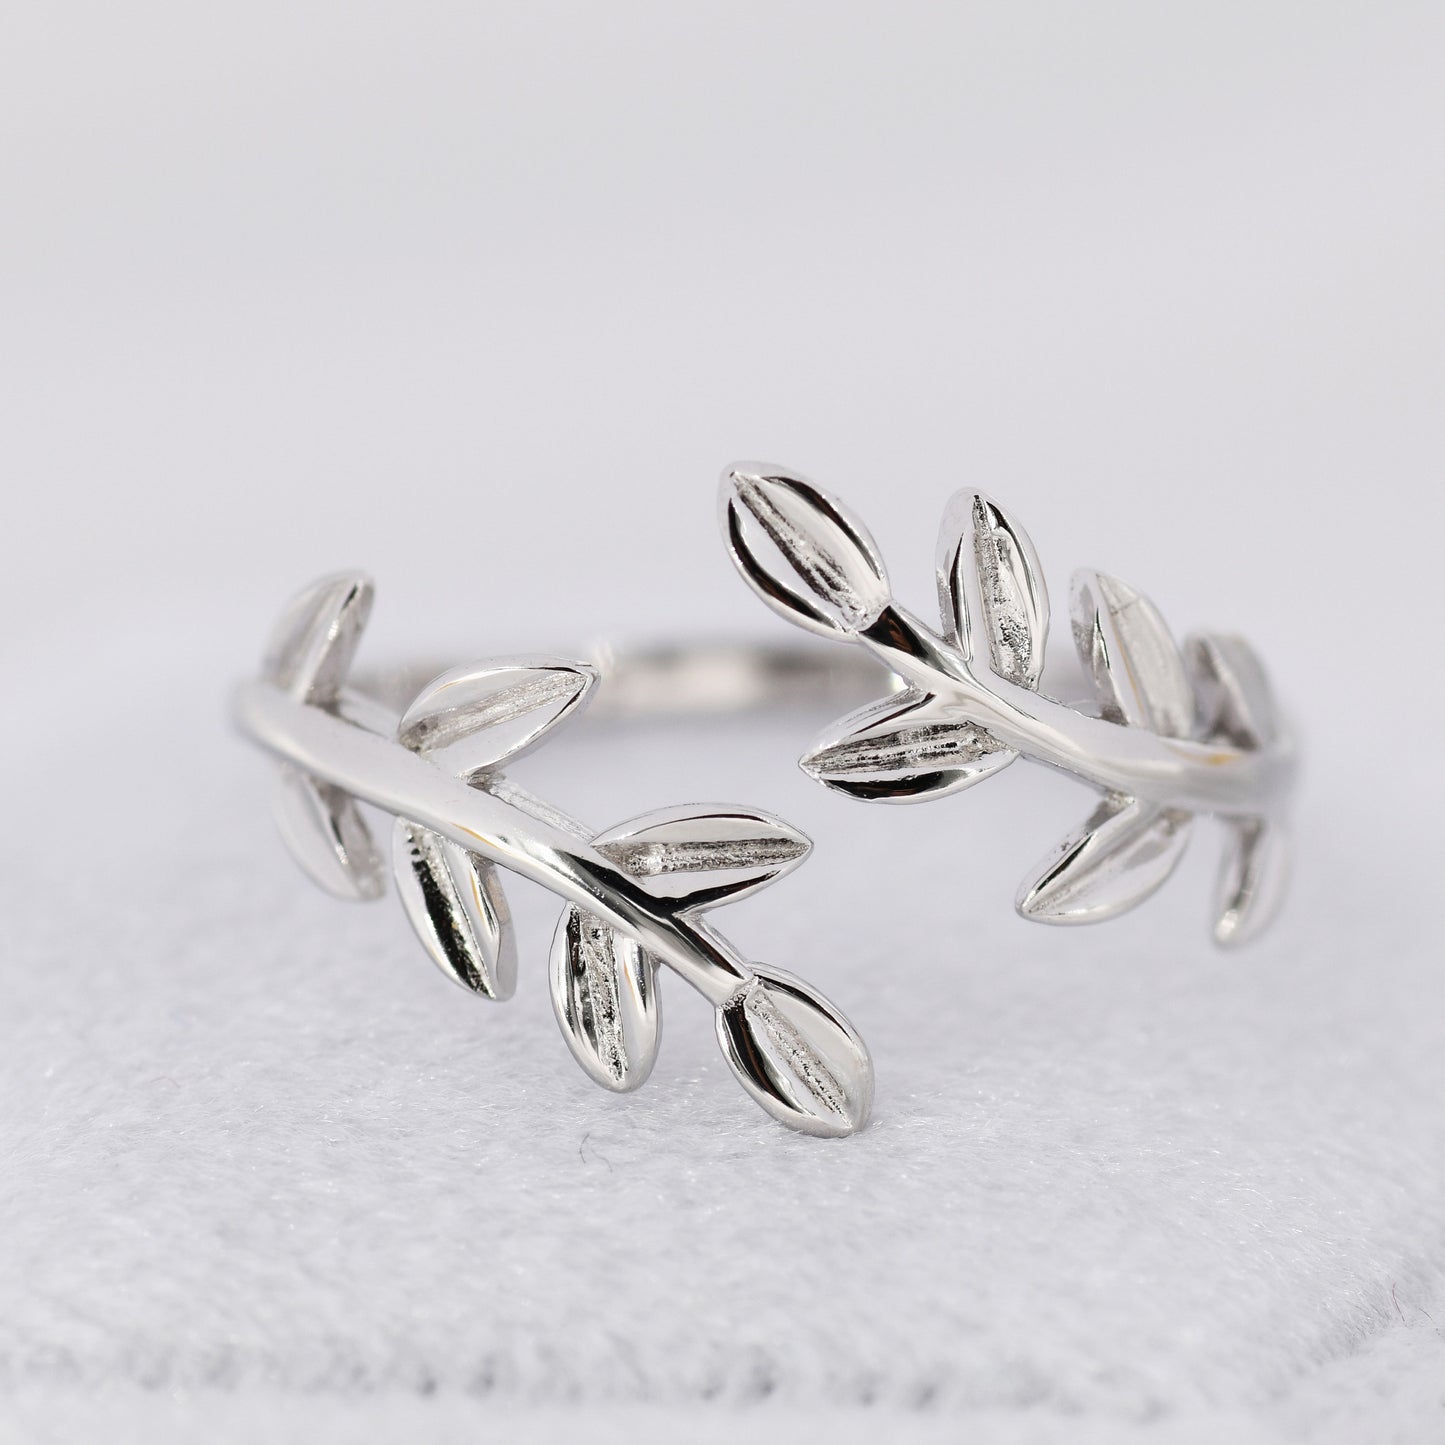 Sterling Silver Olive Leaf Ring, Adjustable Sized Ring, Friendship Ring,  Olive Branch Nature Inspired Jewellery US 5 - 8